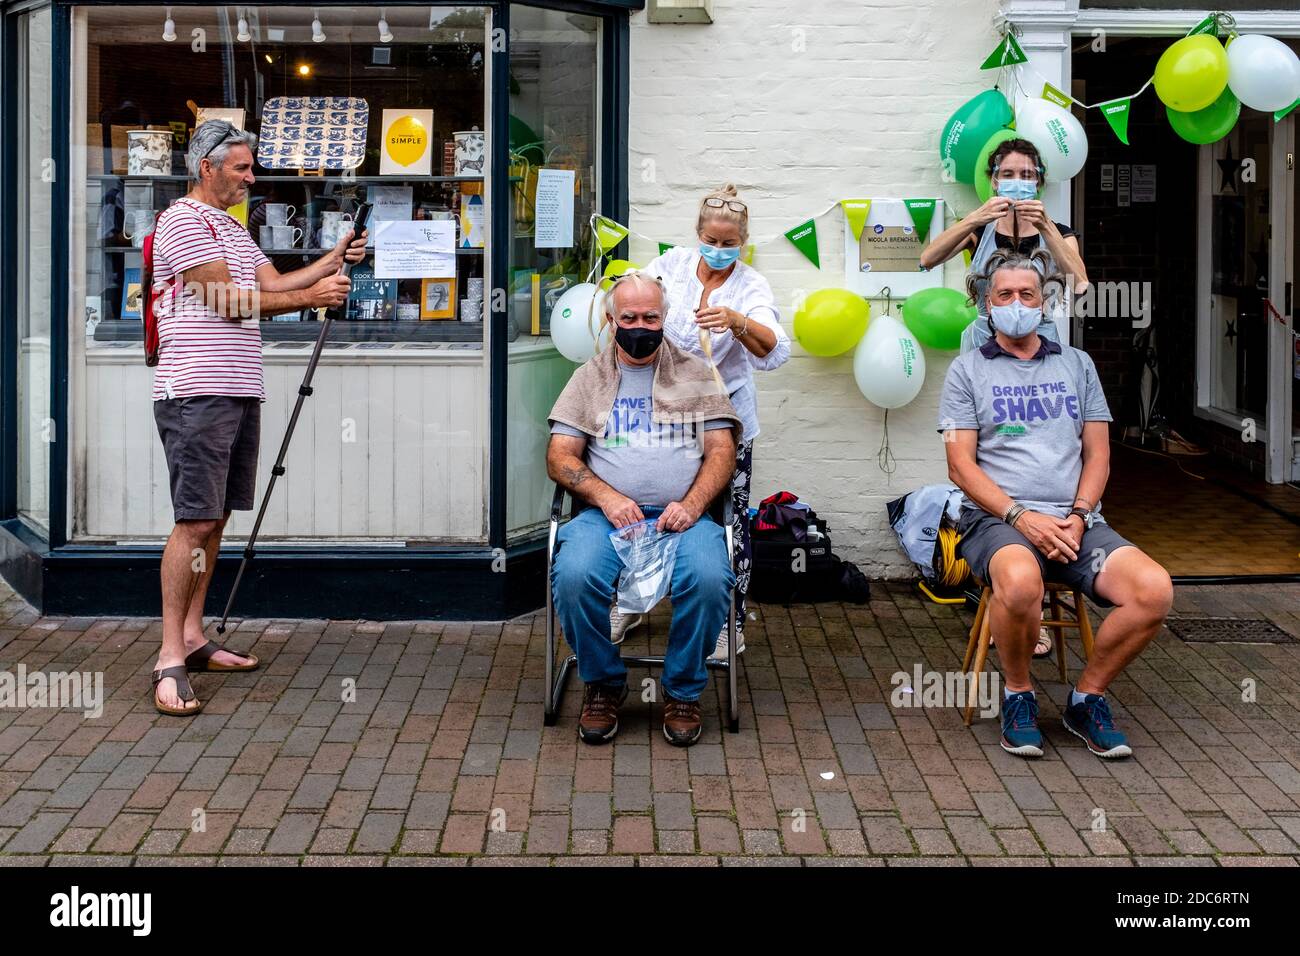 Men Having Their Hair Shaved Off To Raise Money For The Macmillan Cancer Care Charity, High Street, Lewes, East Sussex, UK. Stock Photo